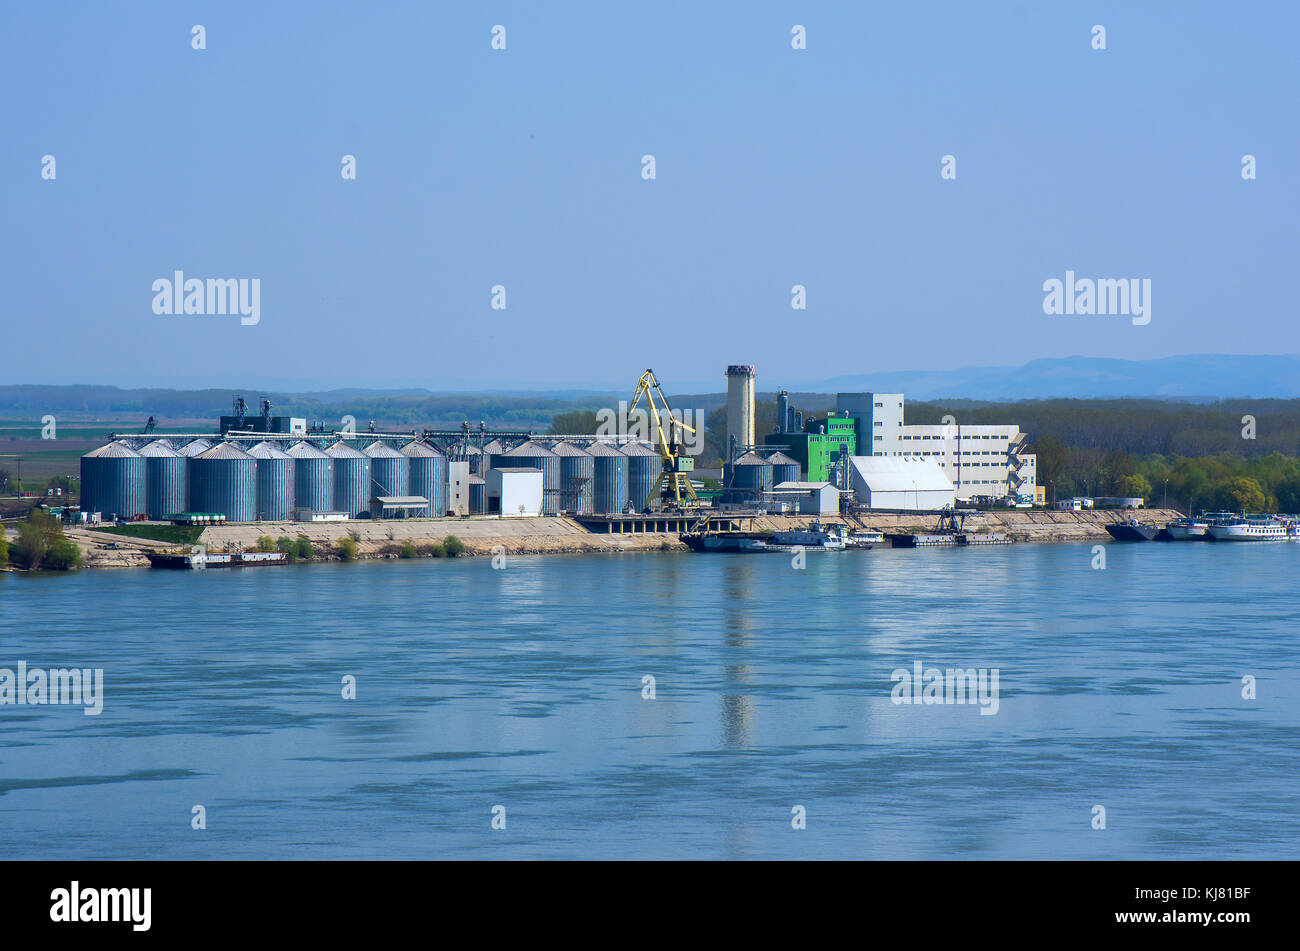 River port with ships, silos, lifting cranes, tanks, warehouses and industrial buildings. Stock Photo